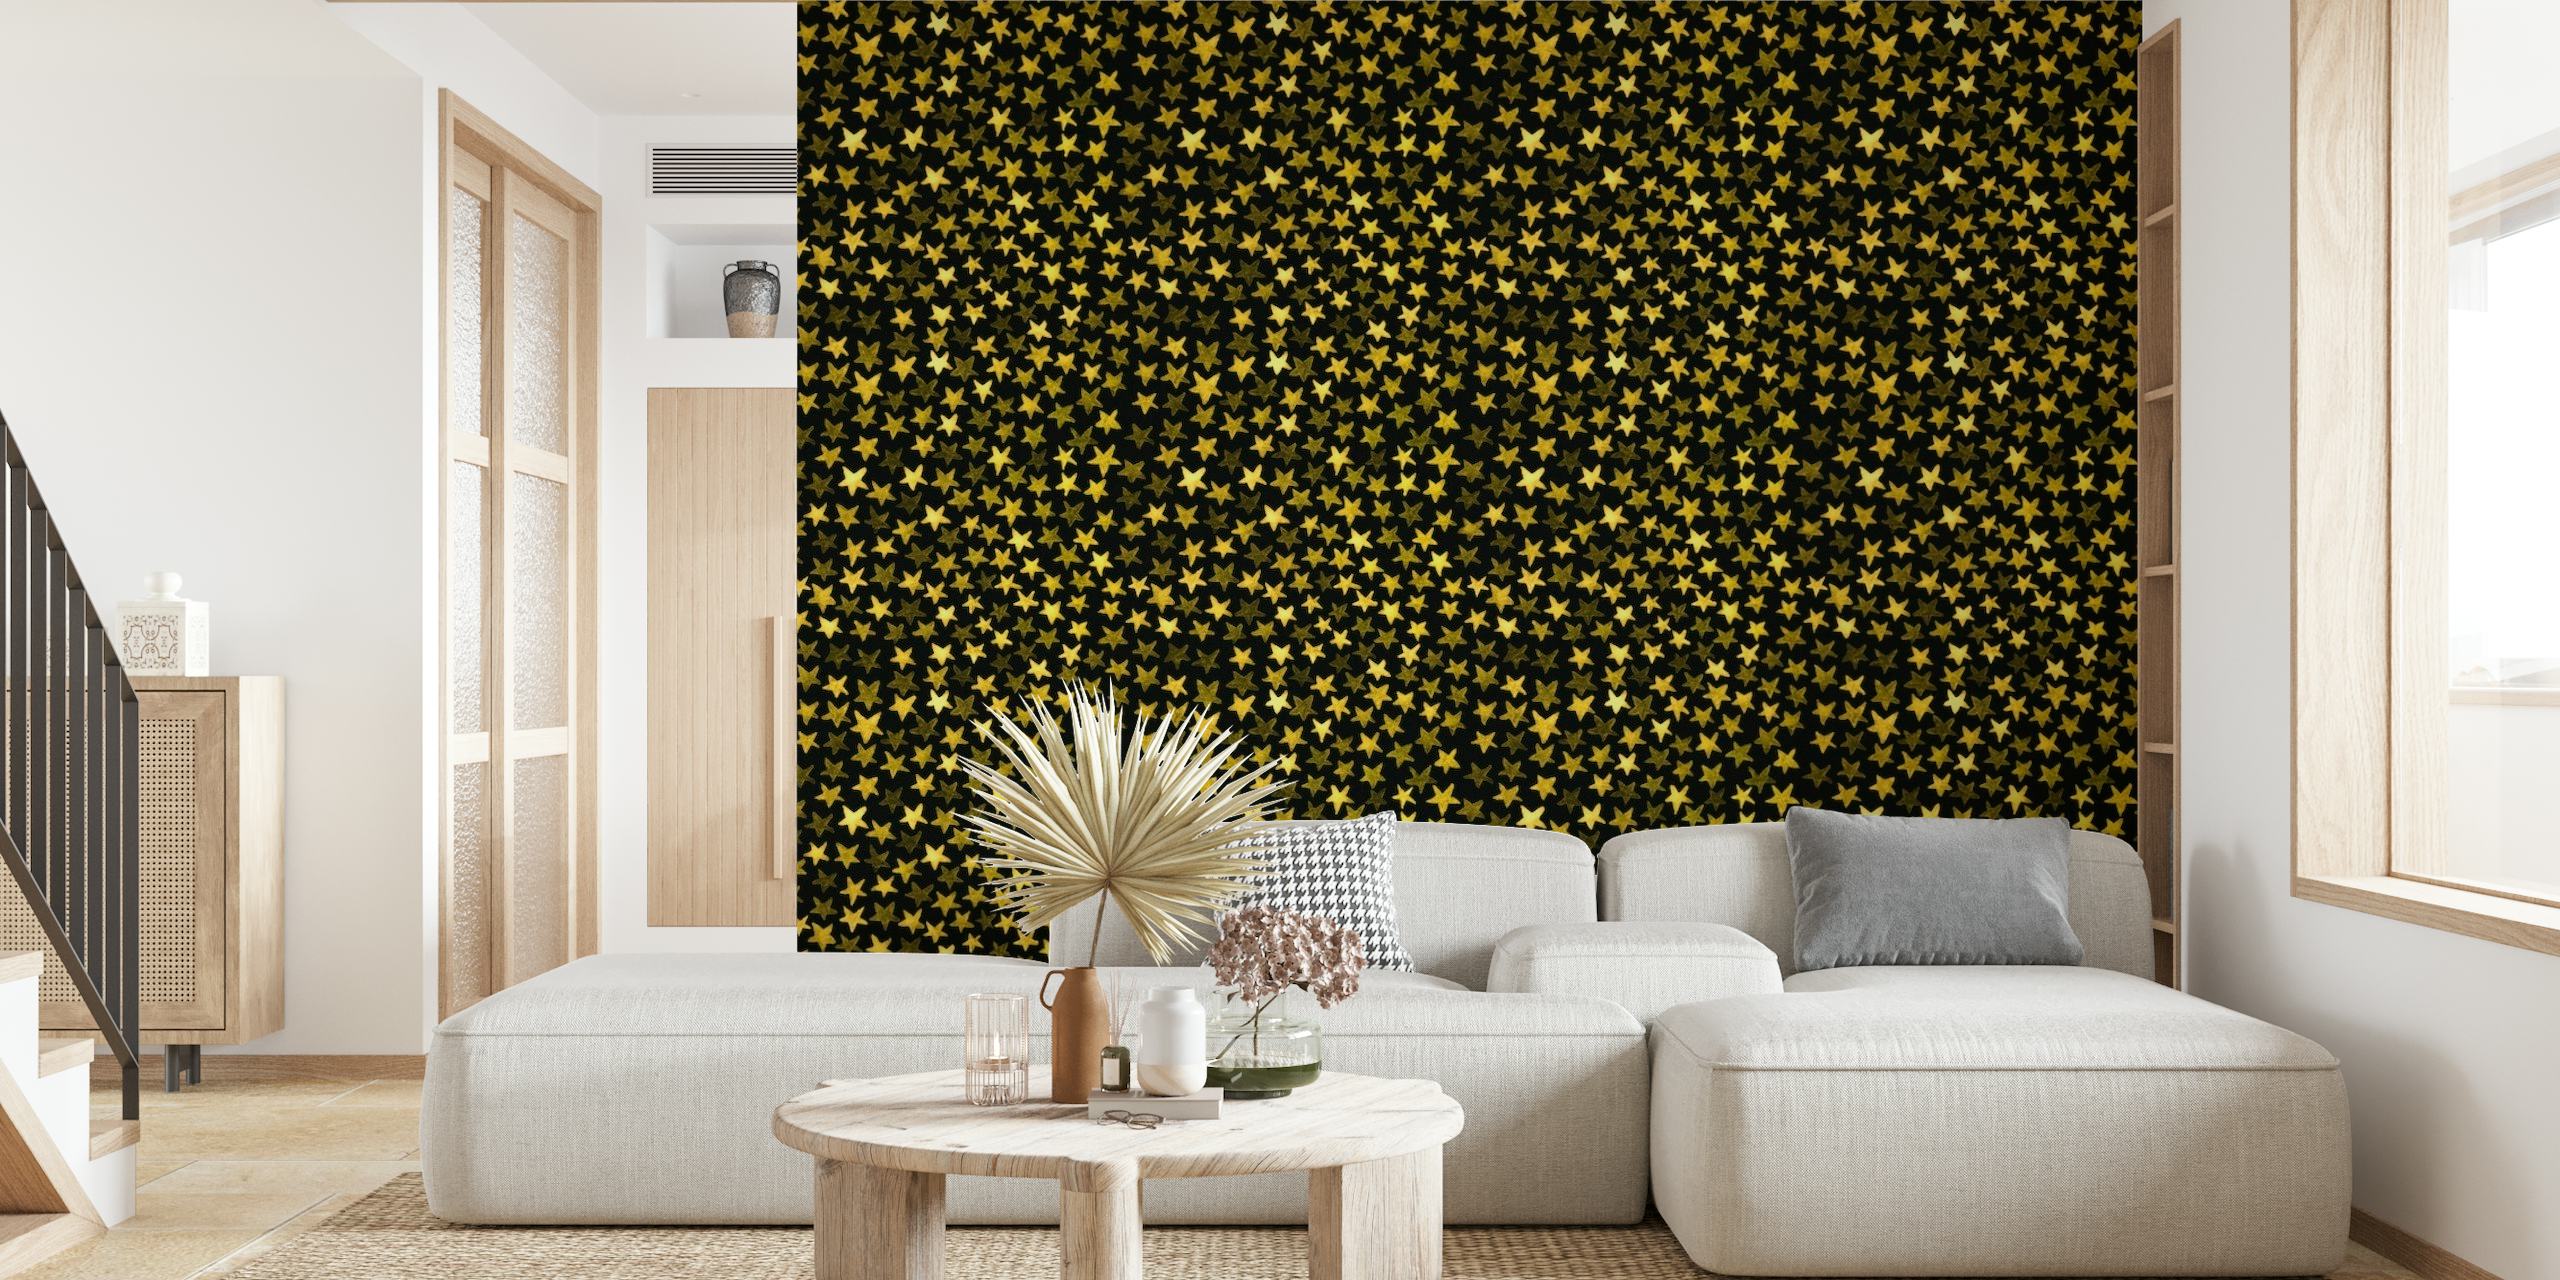 Abstract watercolor wall mural depicting a sea of stars in golden hues against a dark background